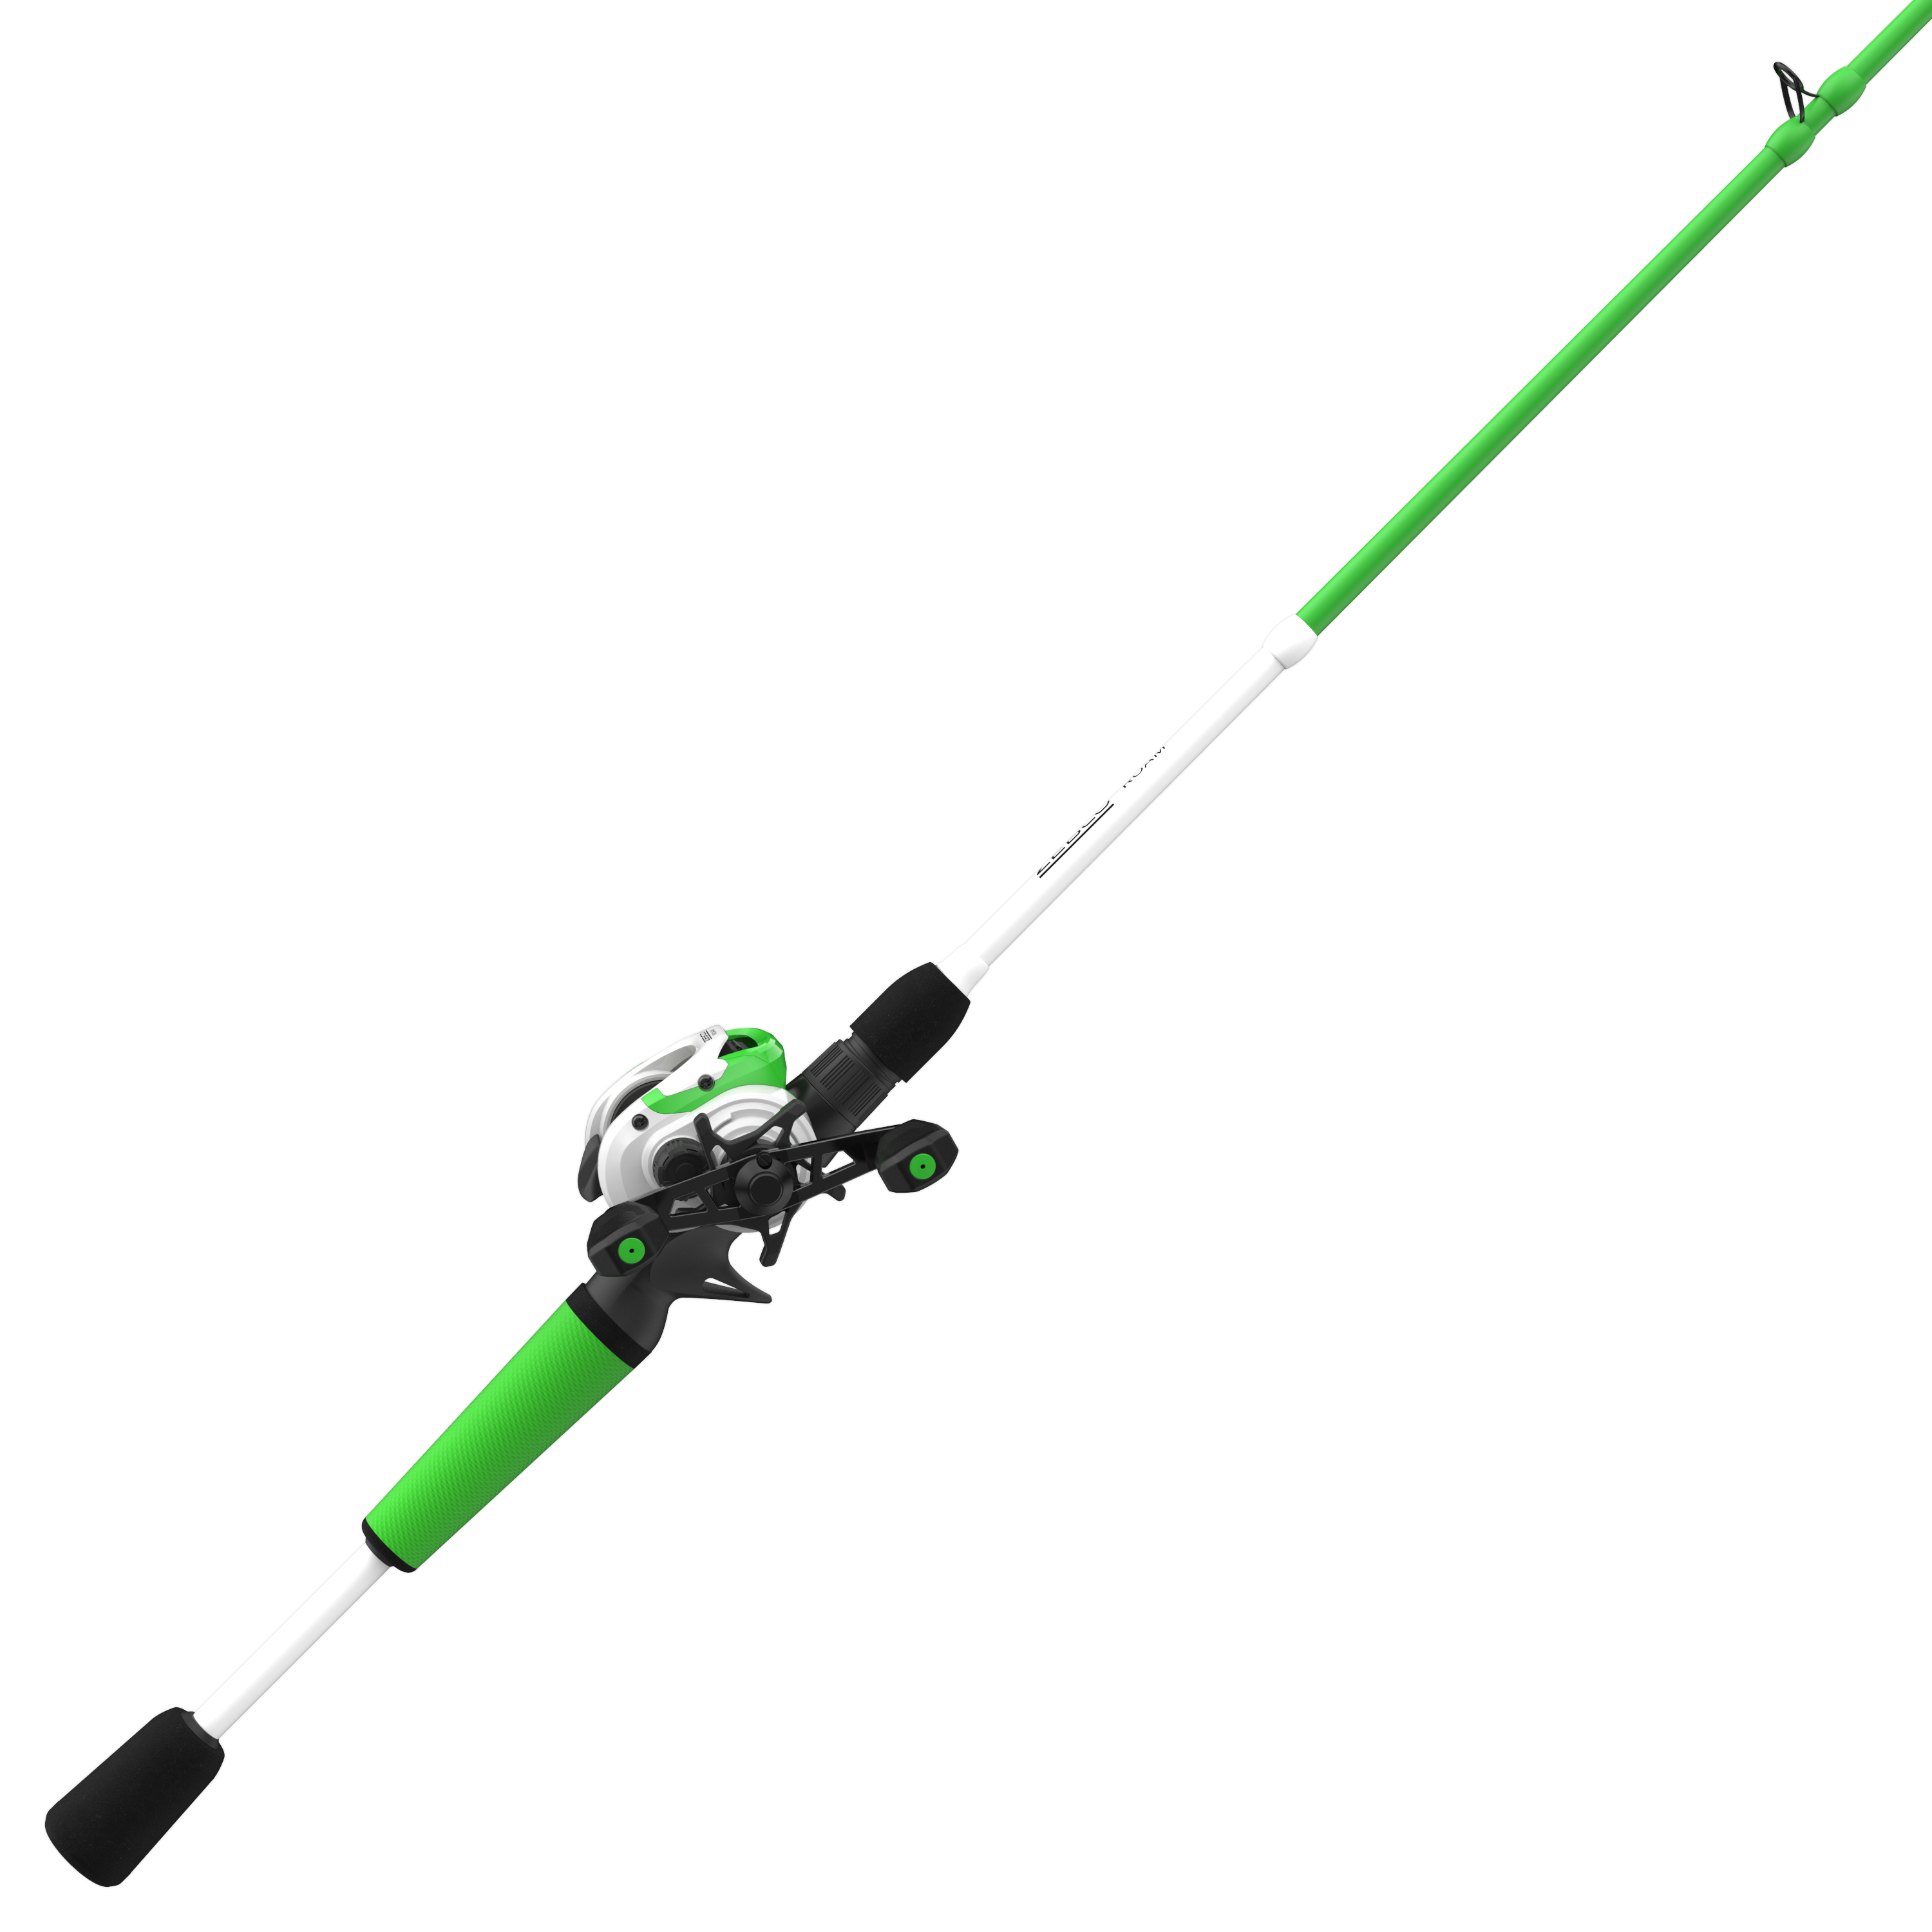  Zebco Bullet Spincast Reel and Fishing Rod Combo, 6